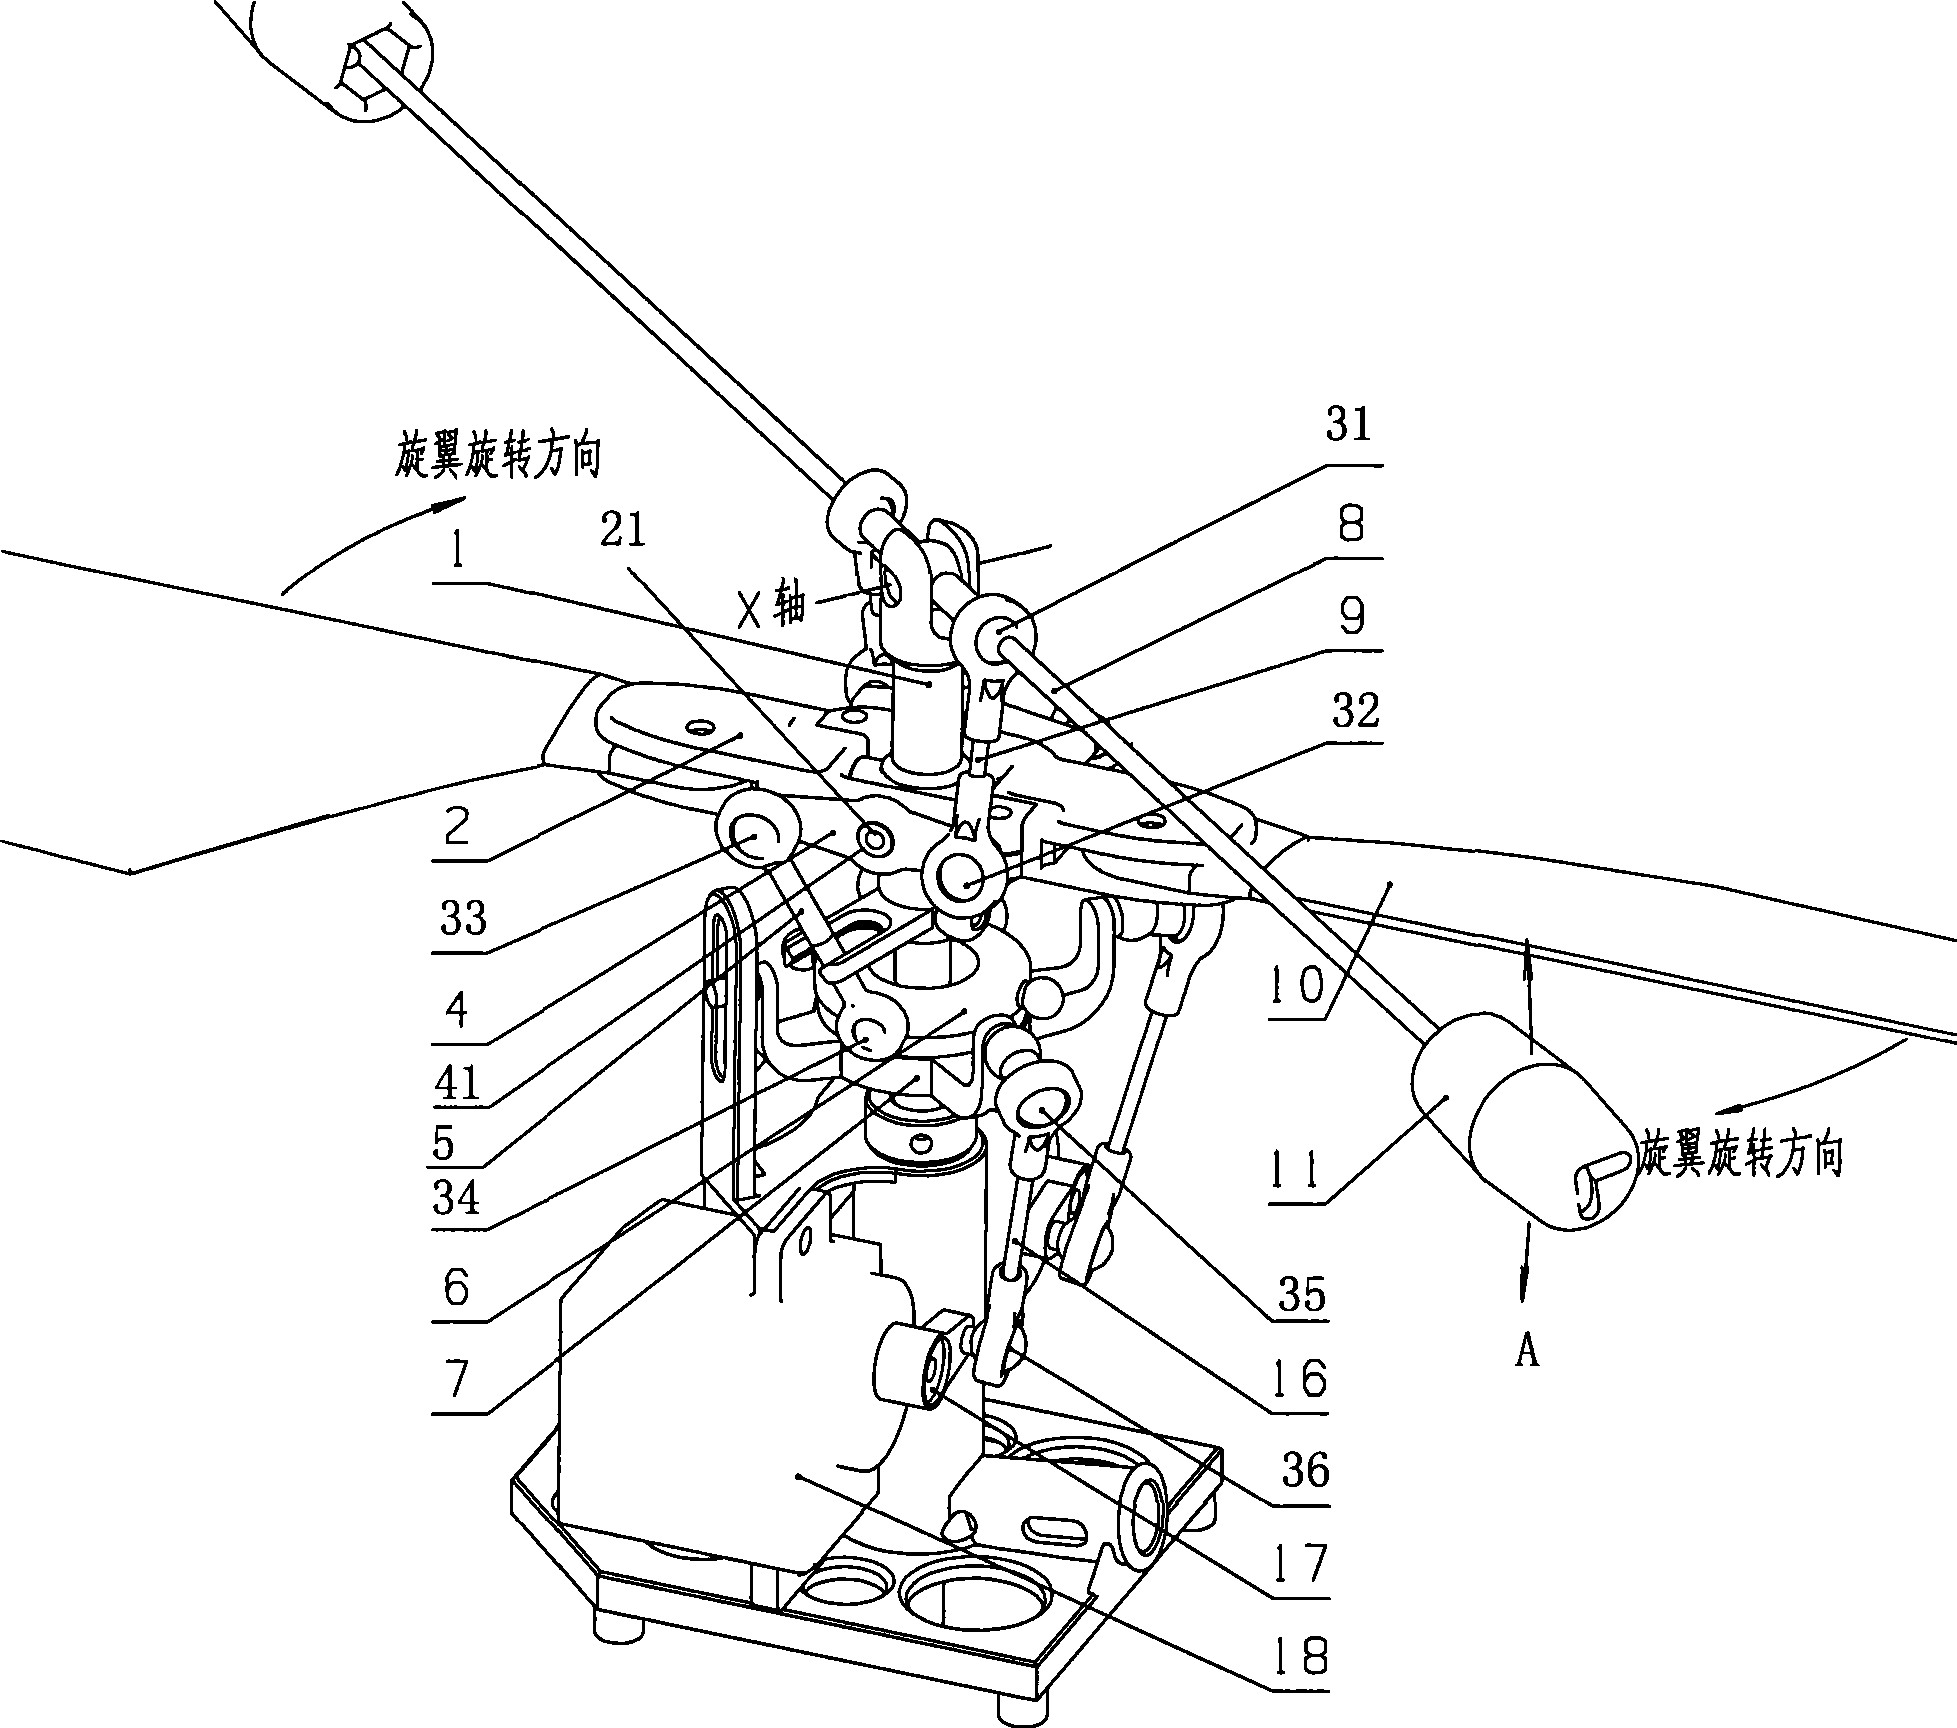 Counterbalance system of remote-control model helicopter